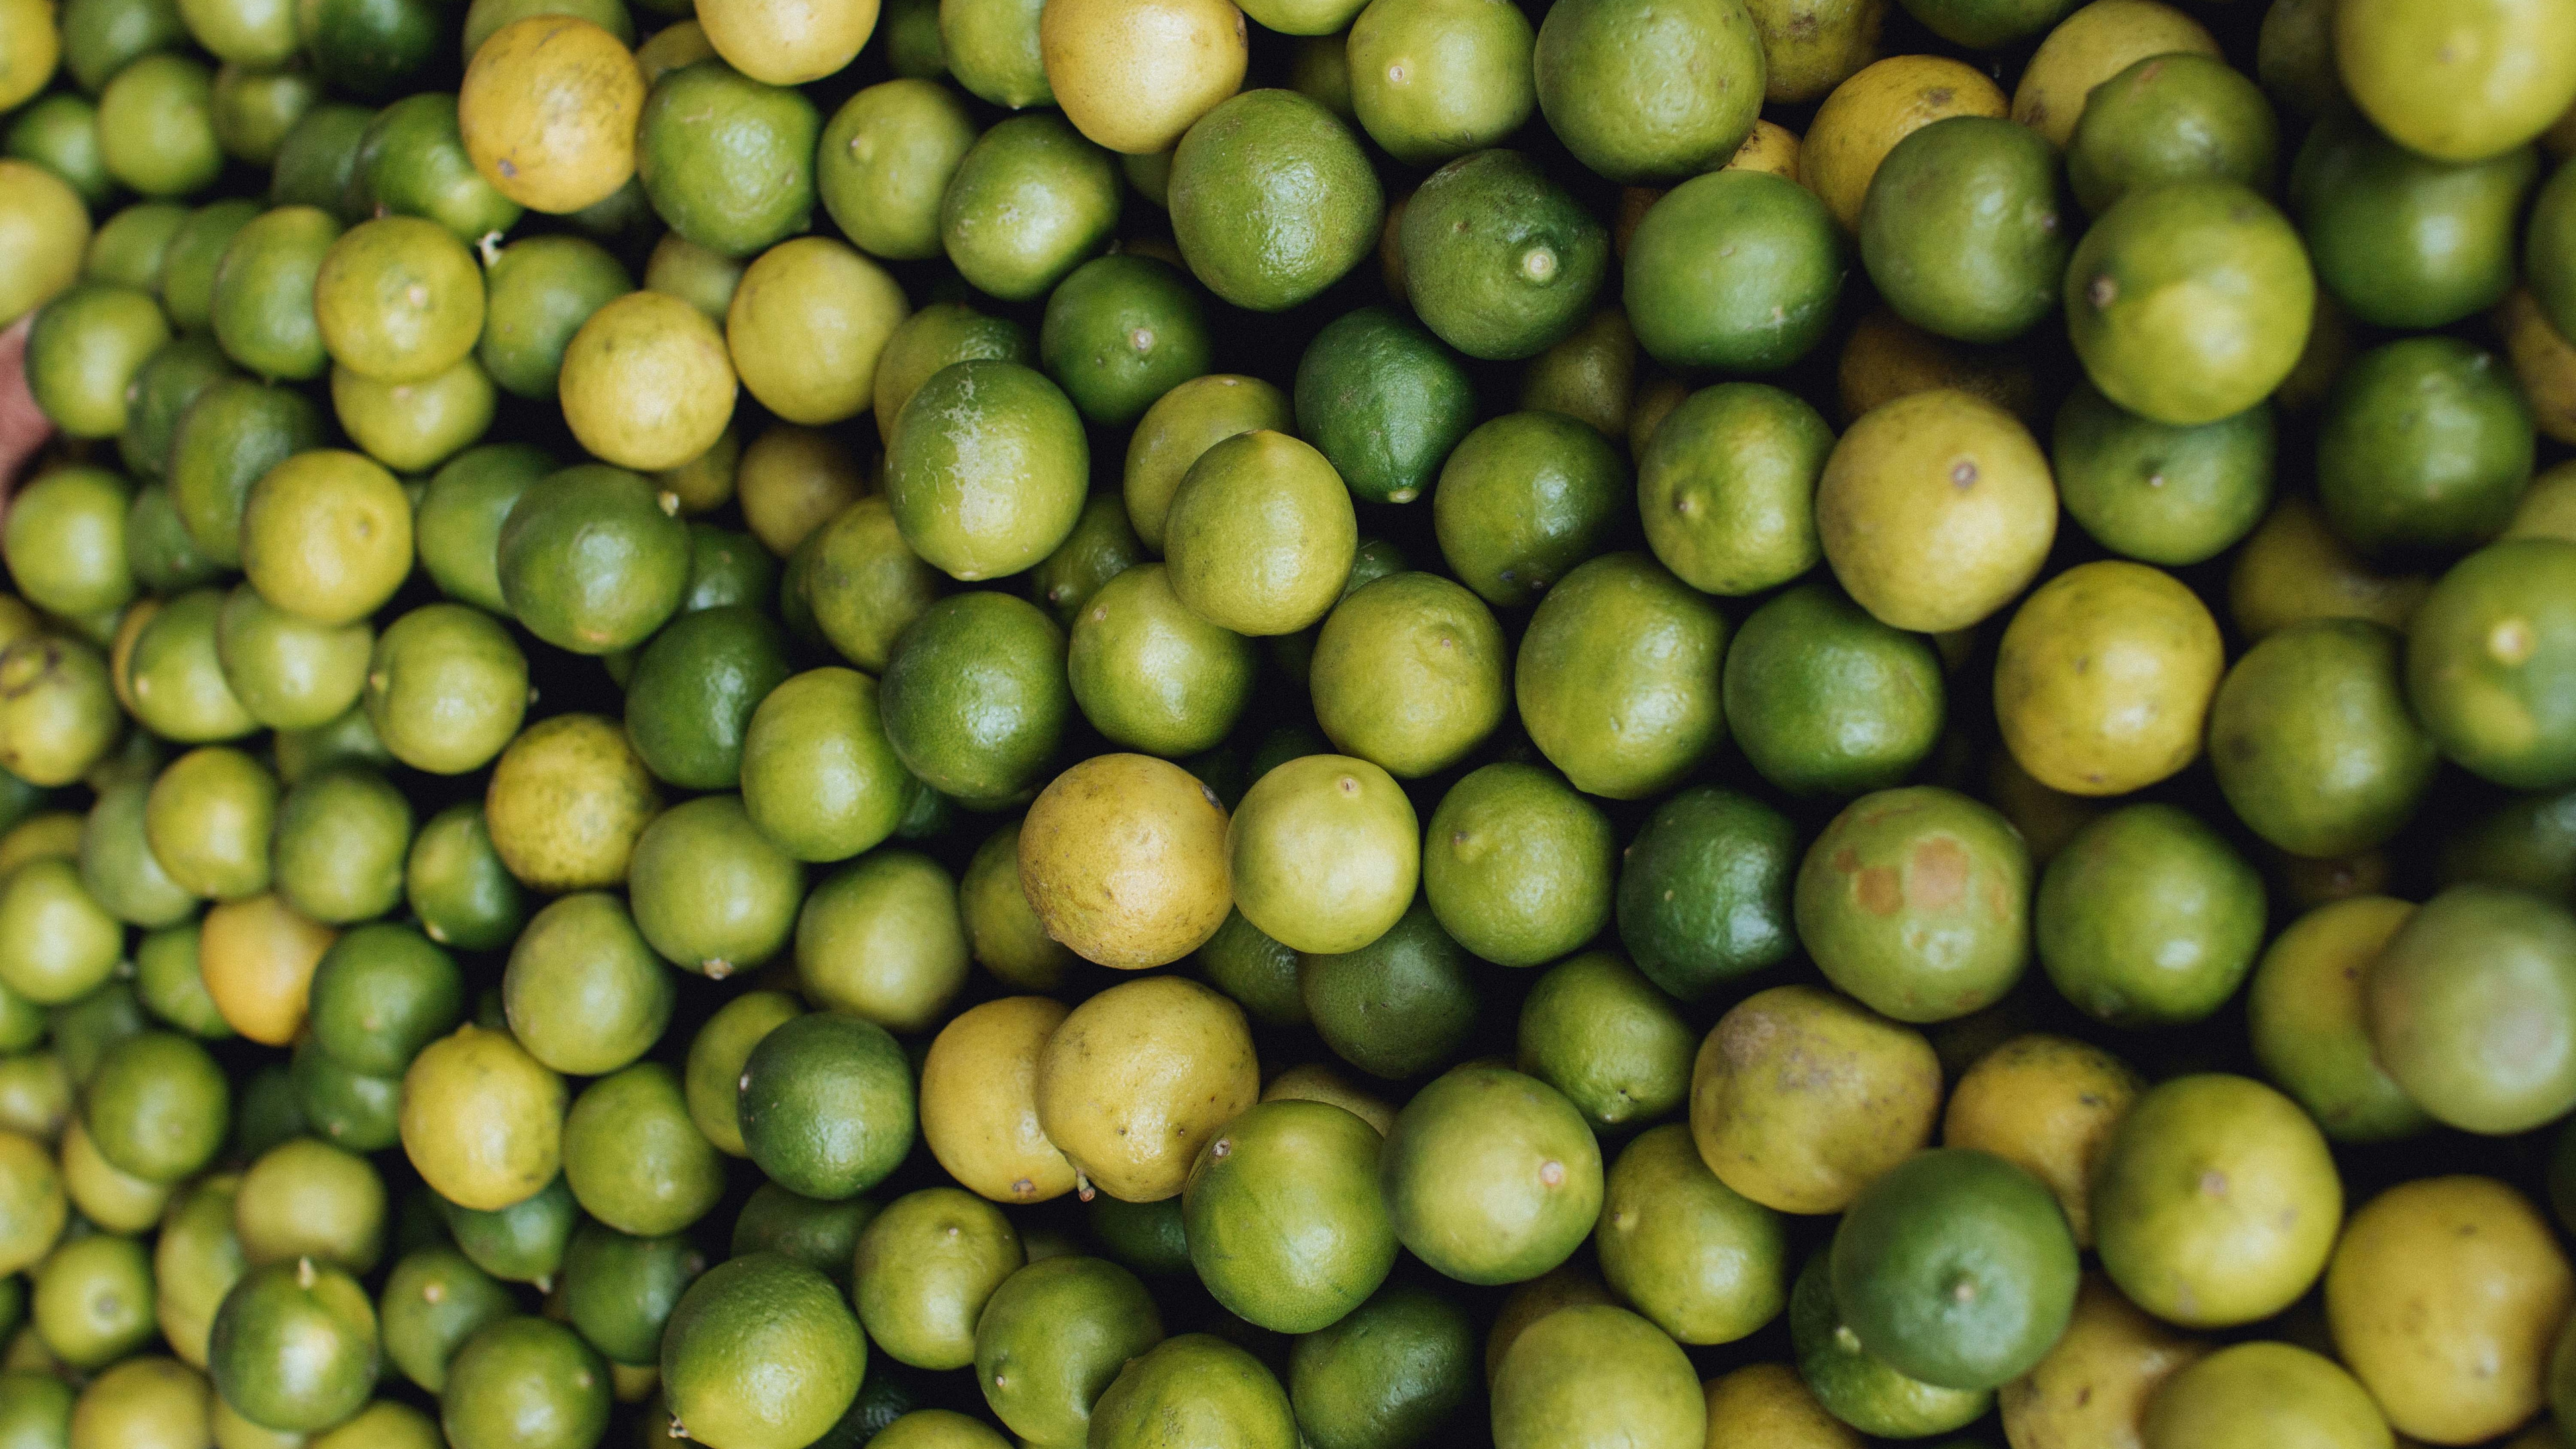 Green and Yellow Round Fruits. Wallpaper in 3840x2160 Resolution